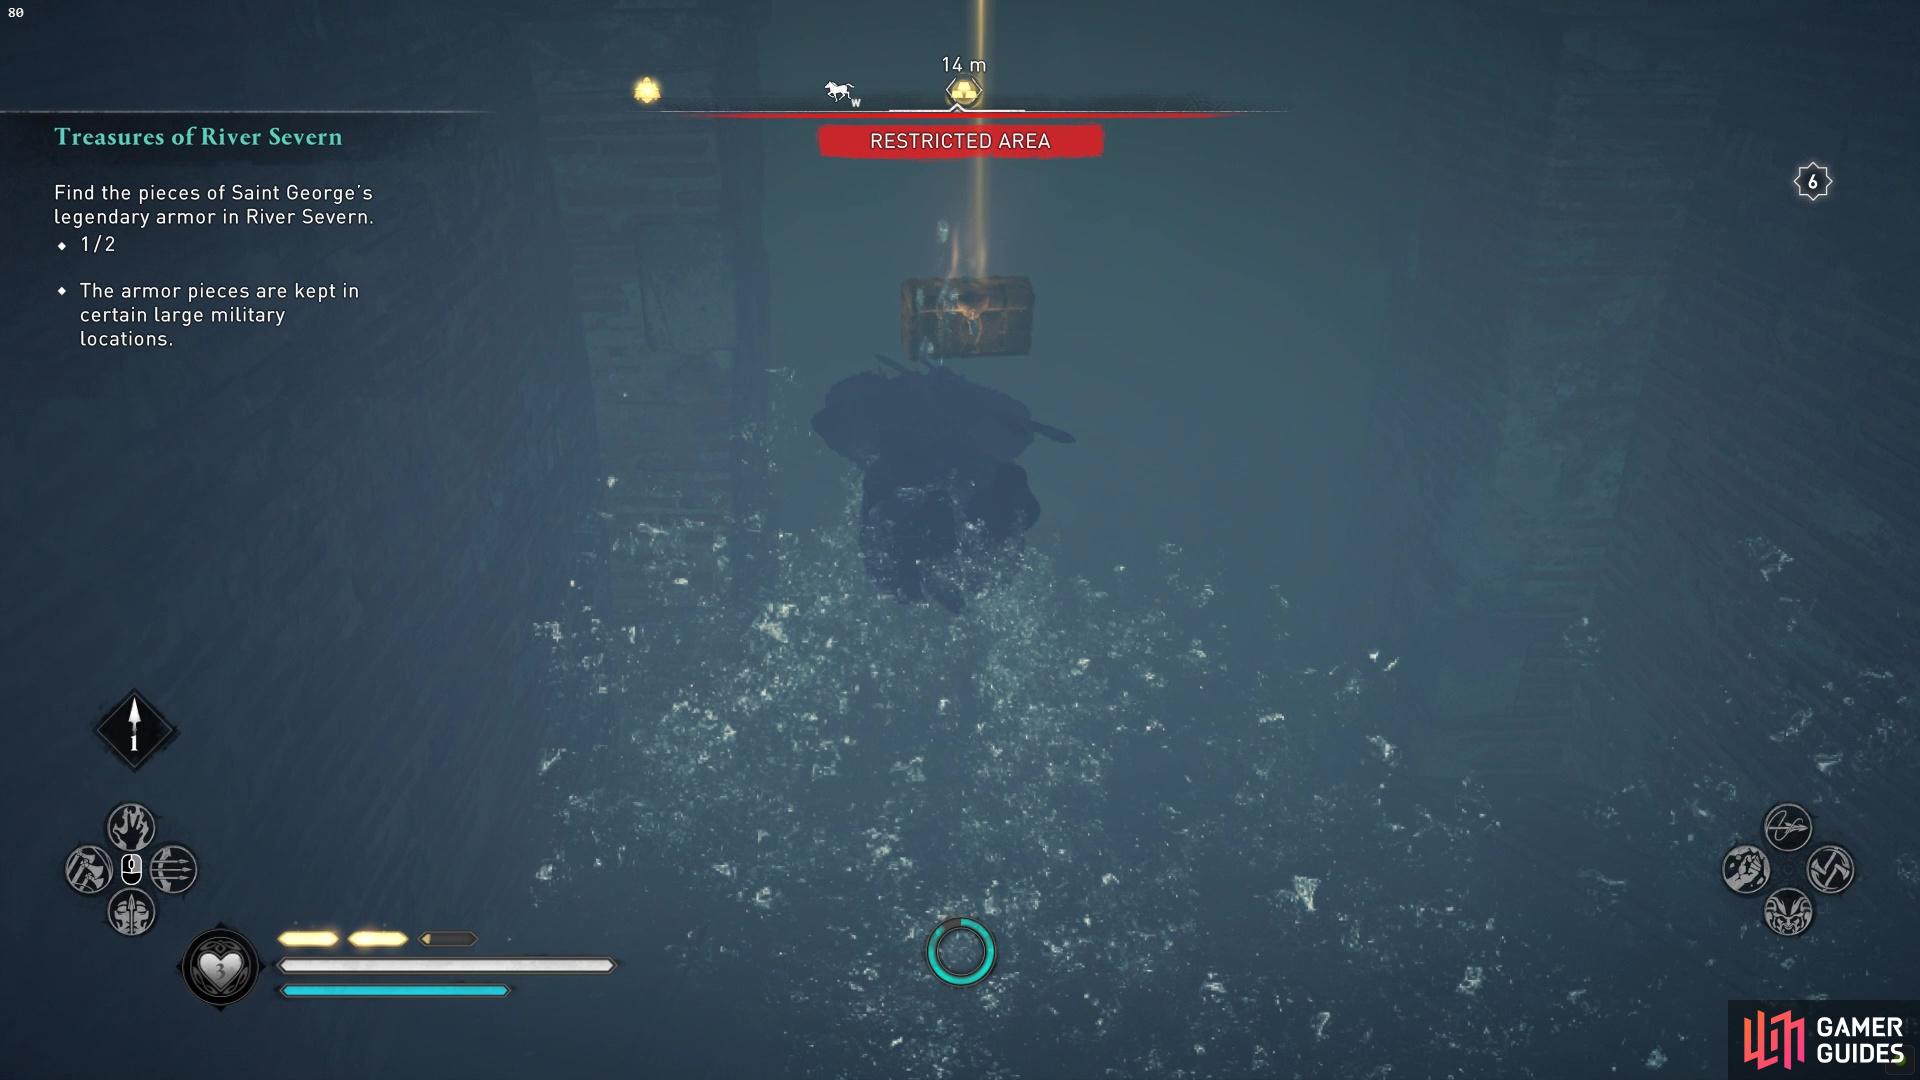 it is in a restricted area so watch out for enemies as you dive for the treasure!